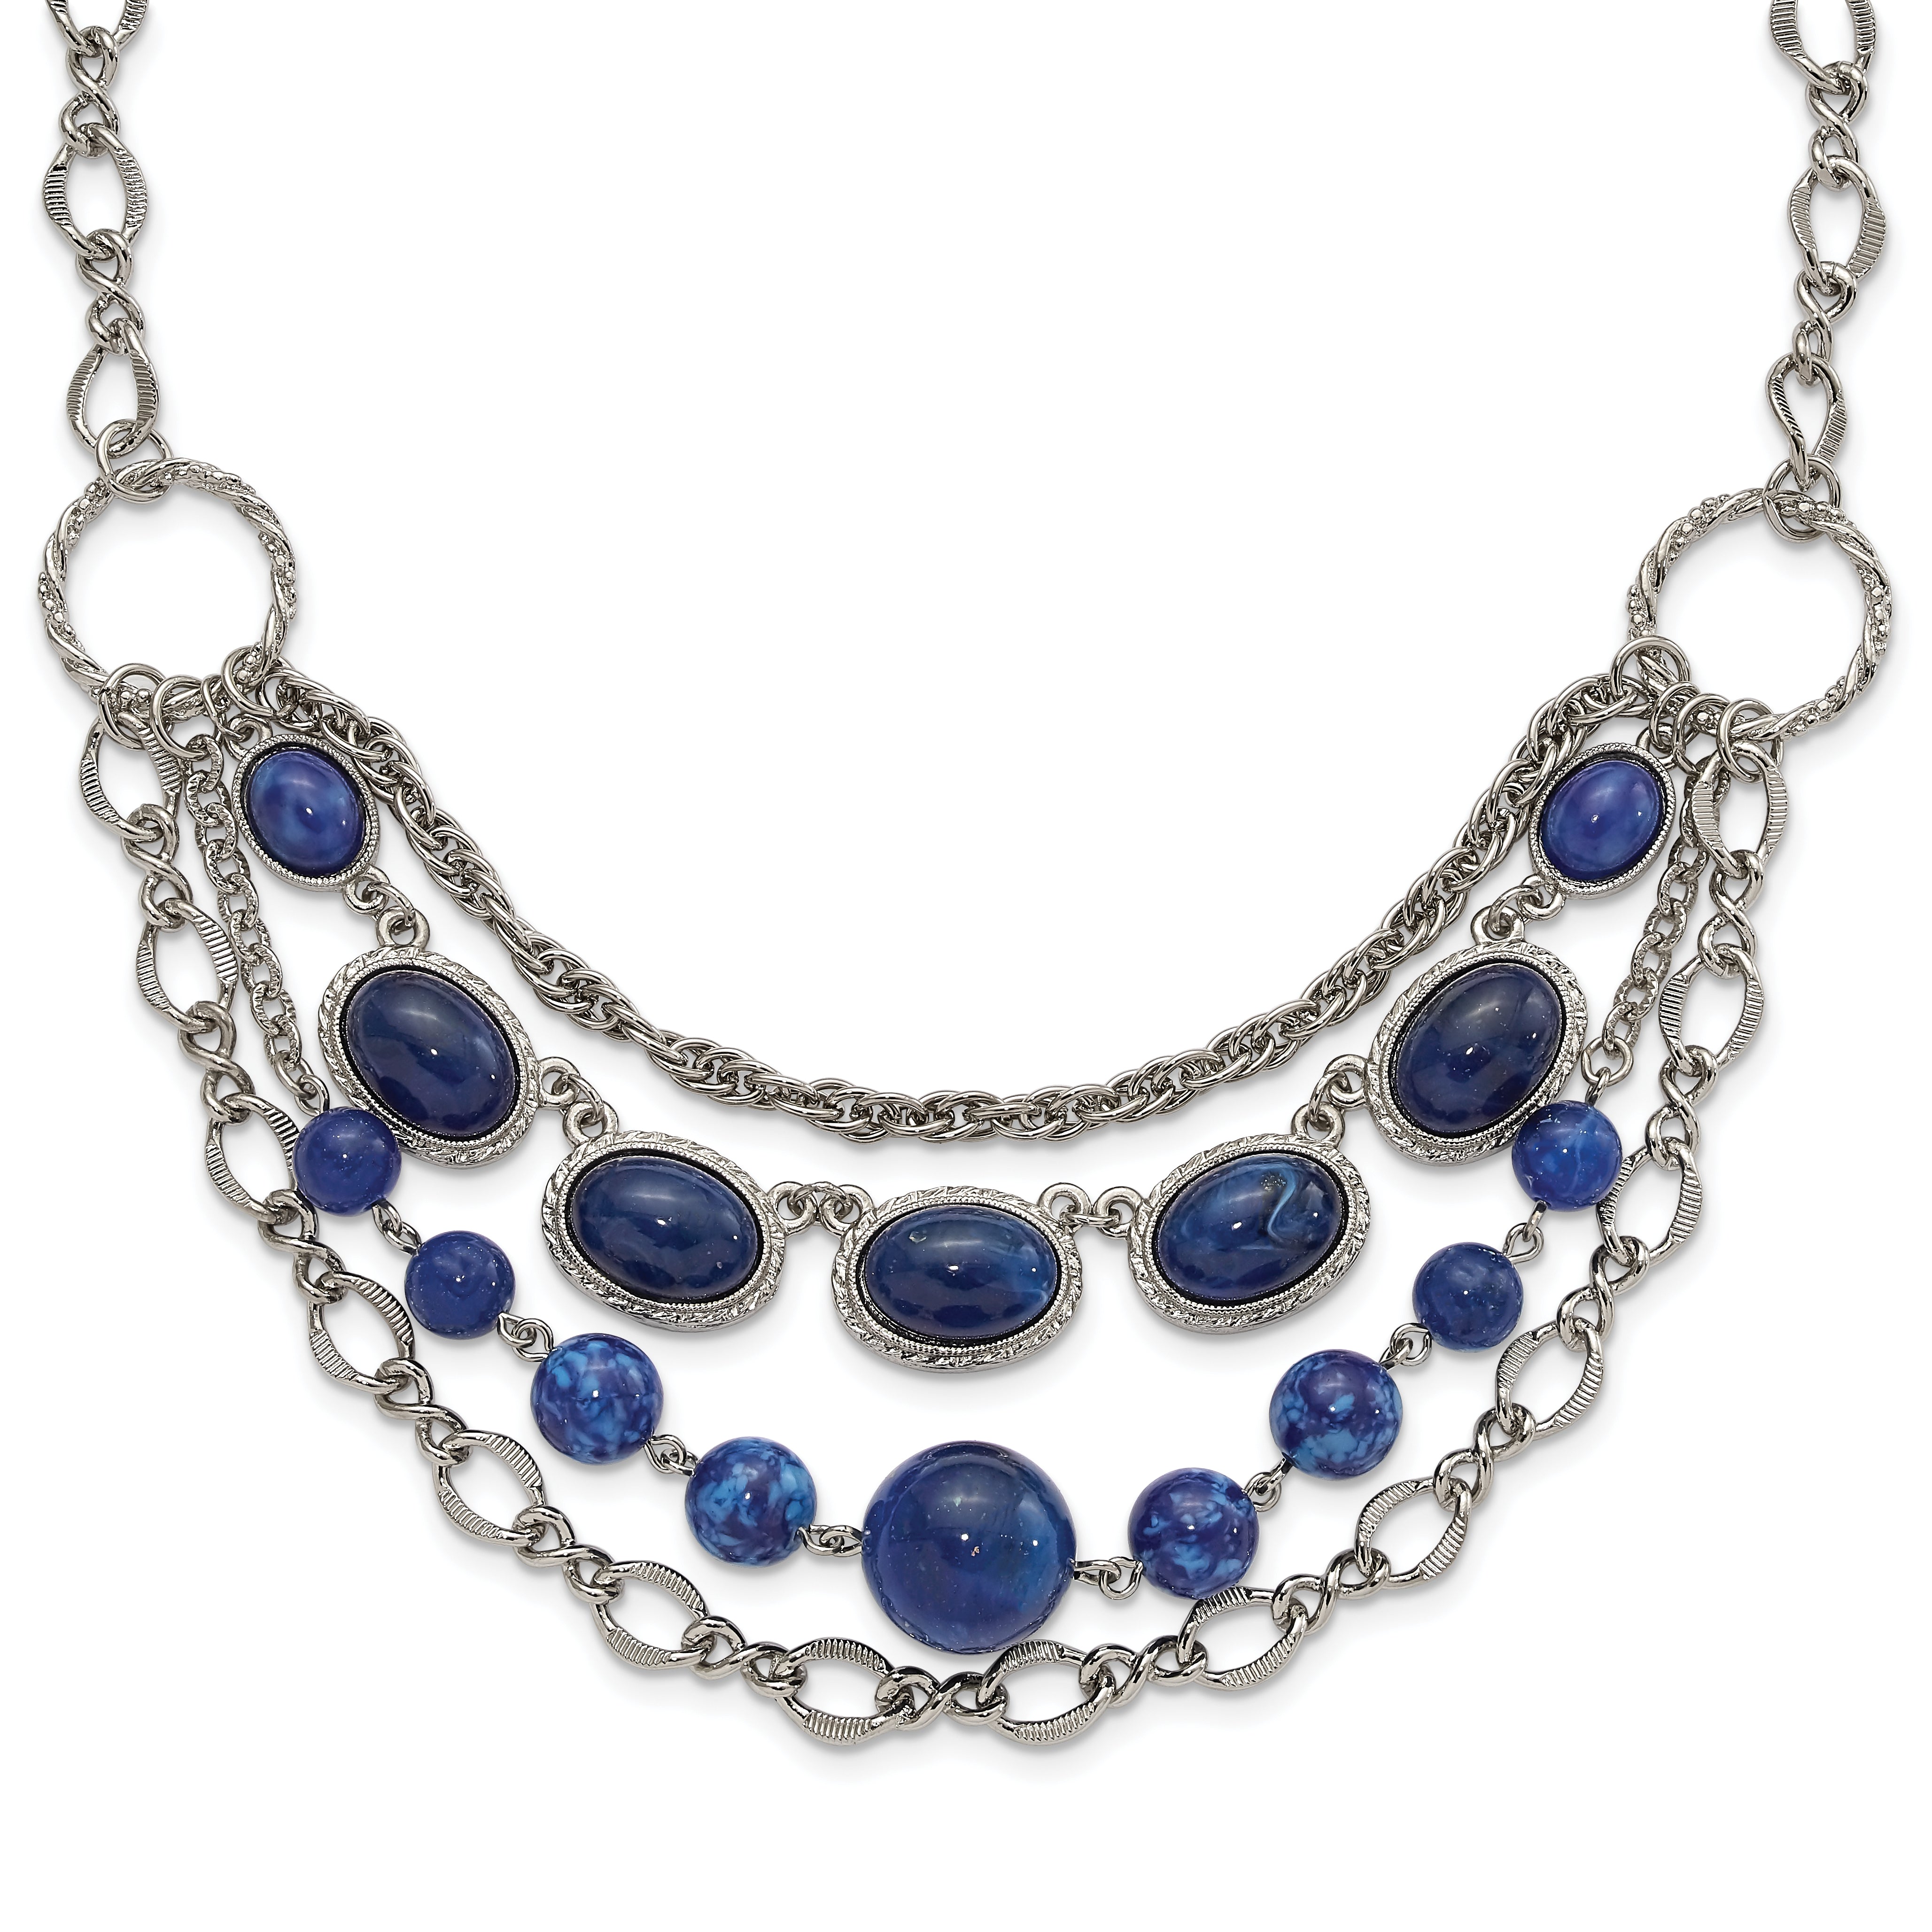 1928 Jewelry Silver-tone Textured Link Blue Glass Beads Graduated Four Row 16 inch Necklace with 3 inch extension